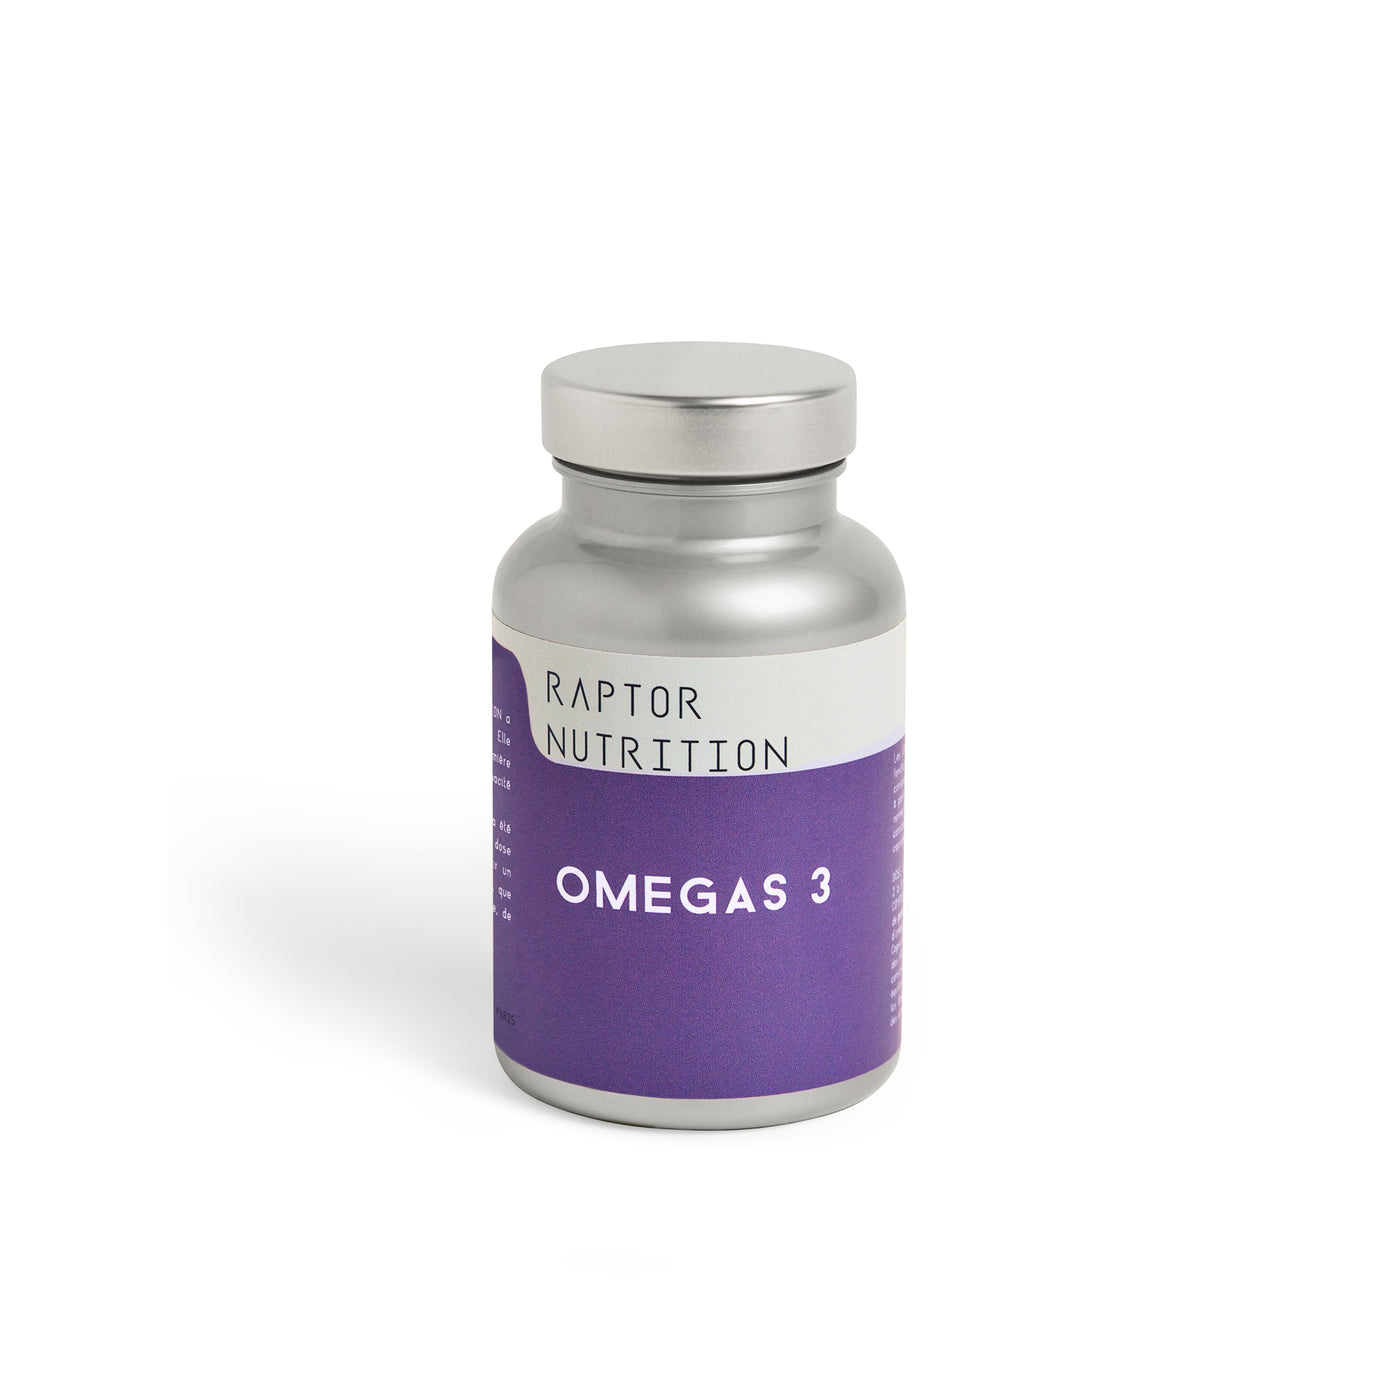 Omegas 3